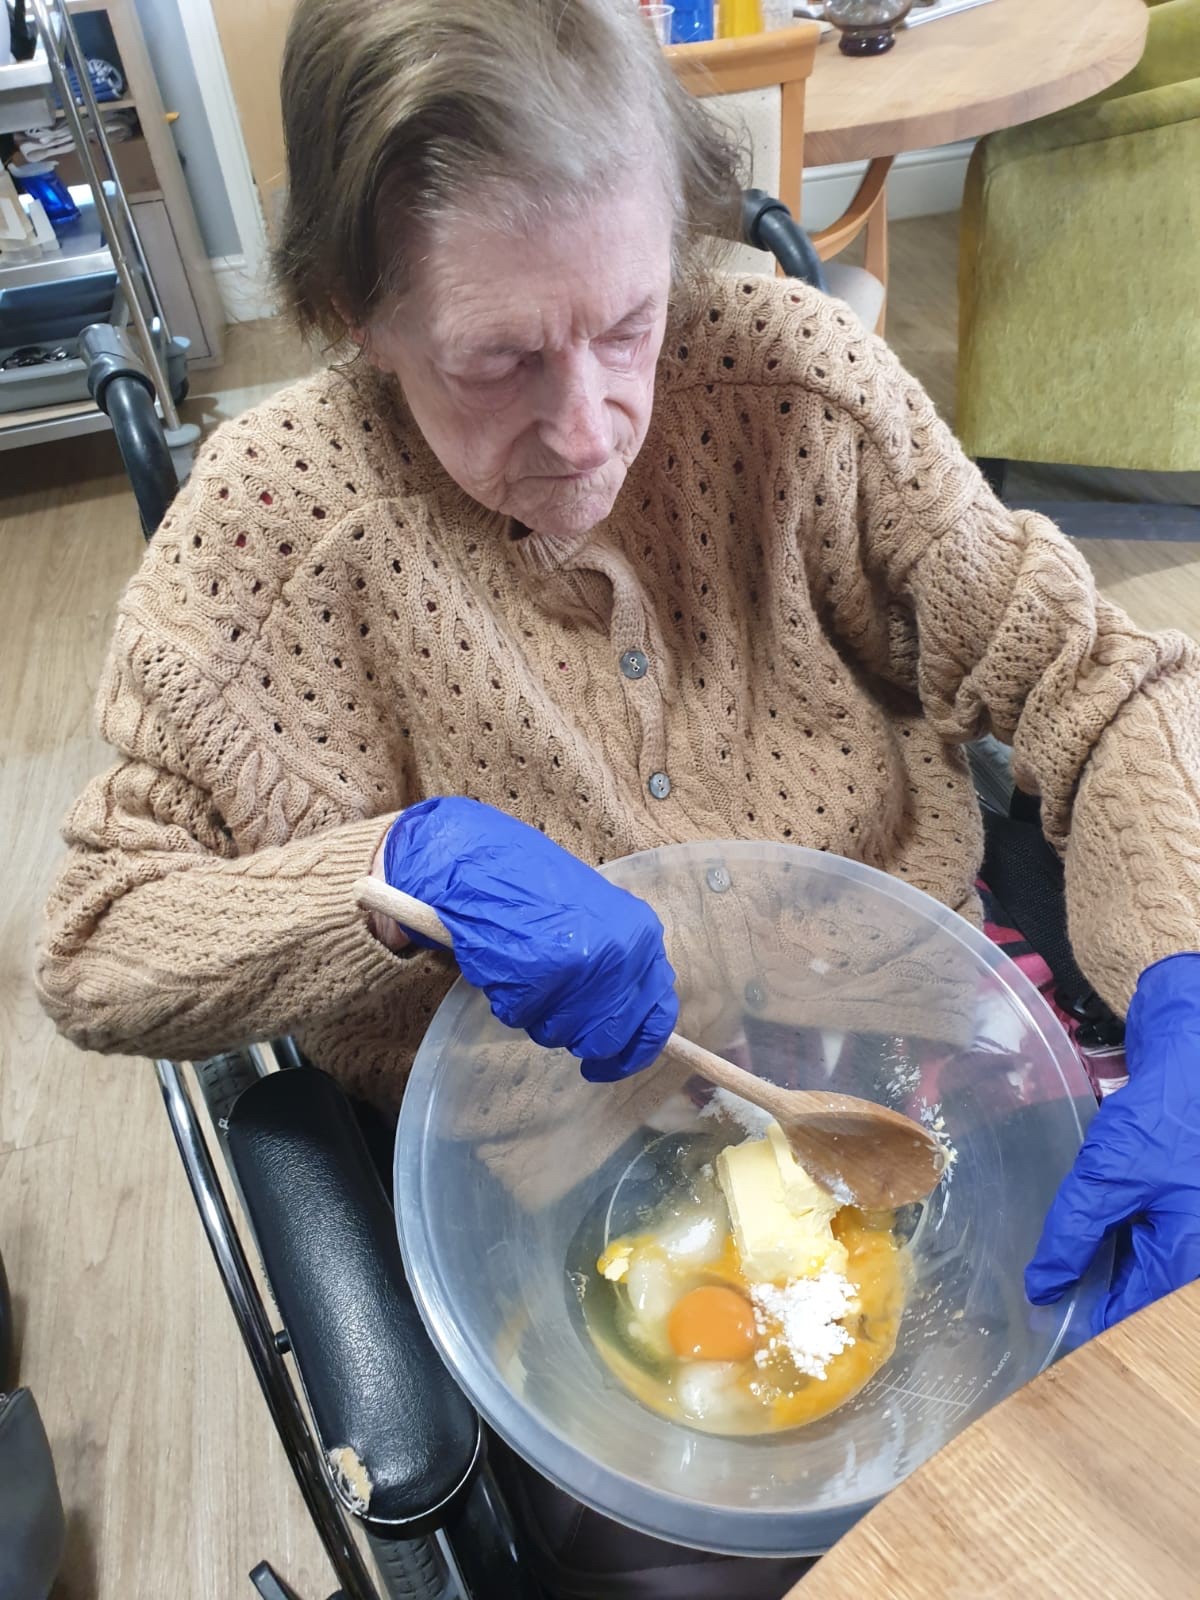 Baking at The Firs Residential Nursing Home in Taunton